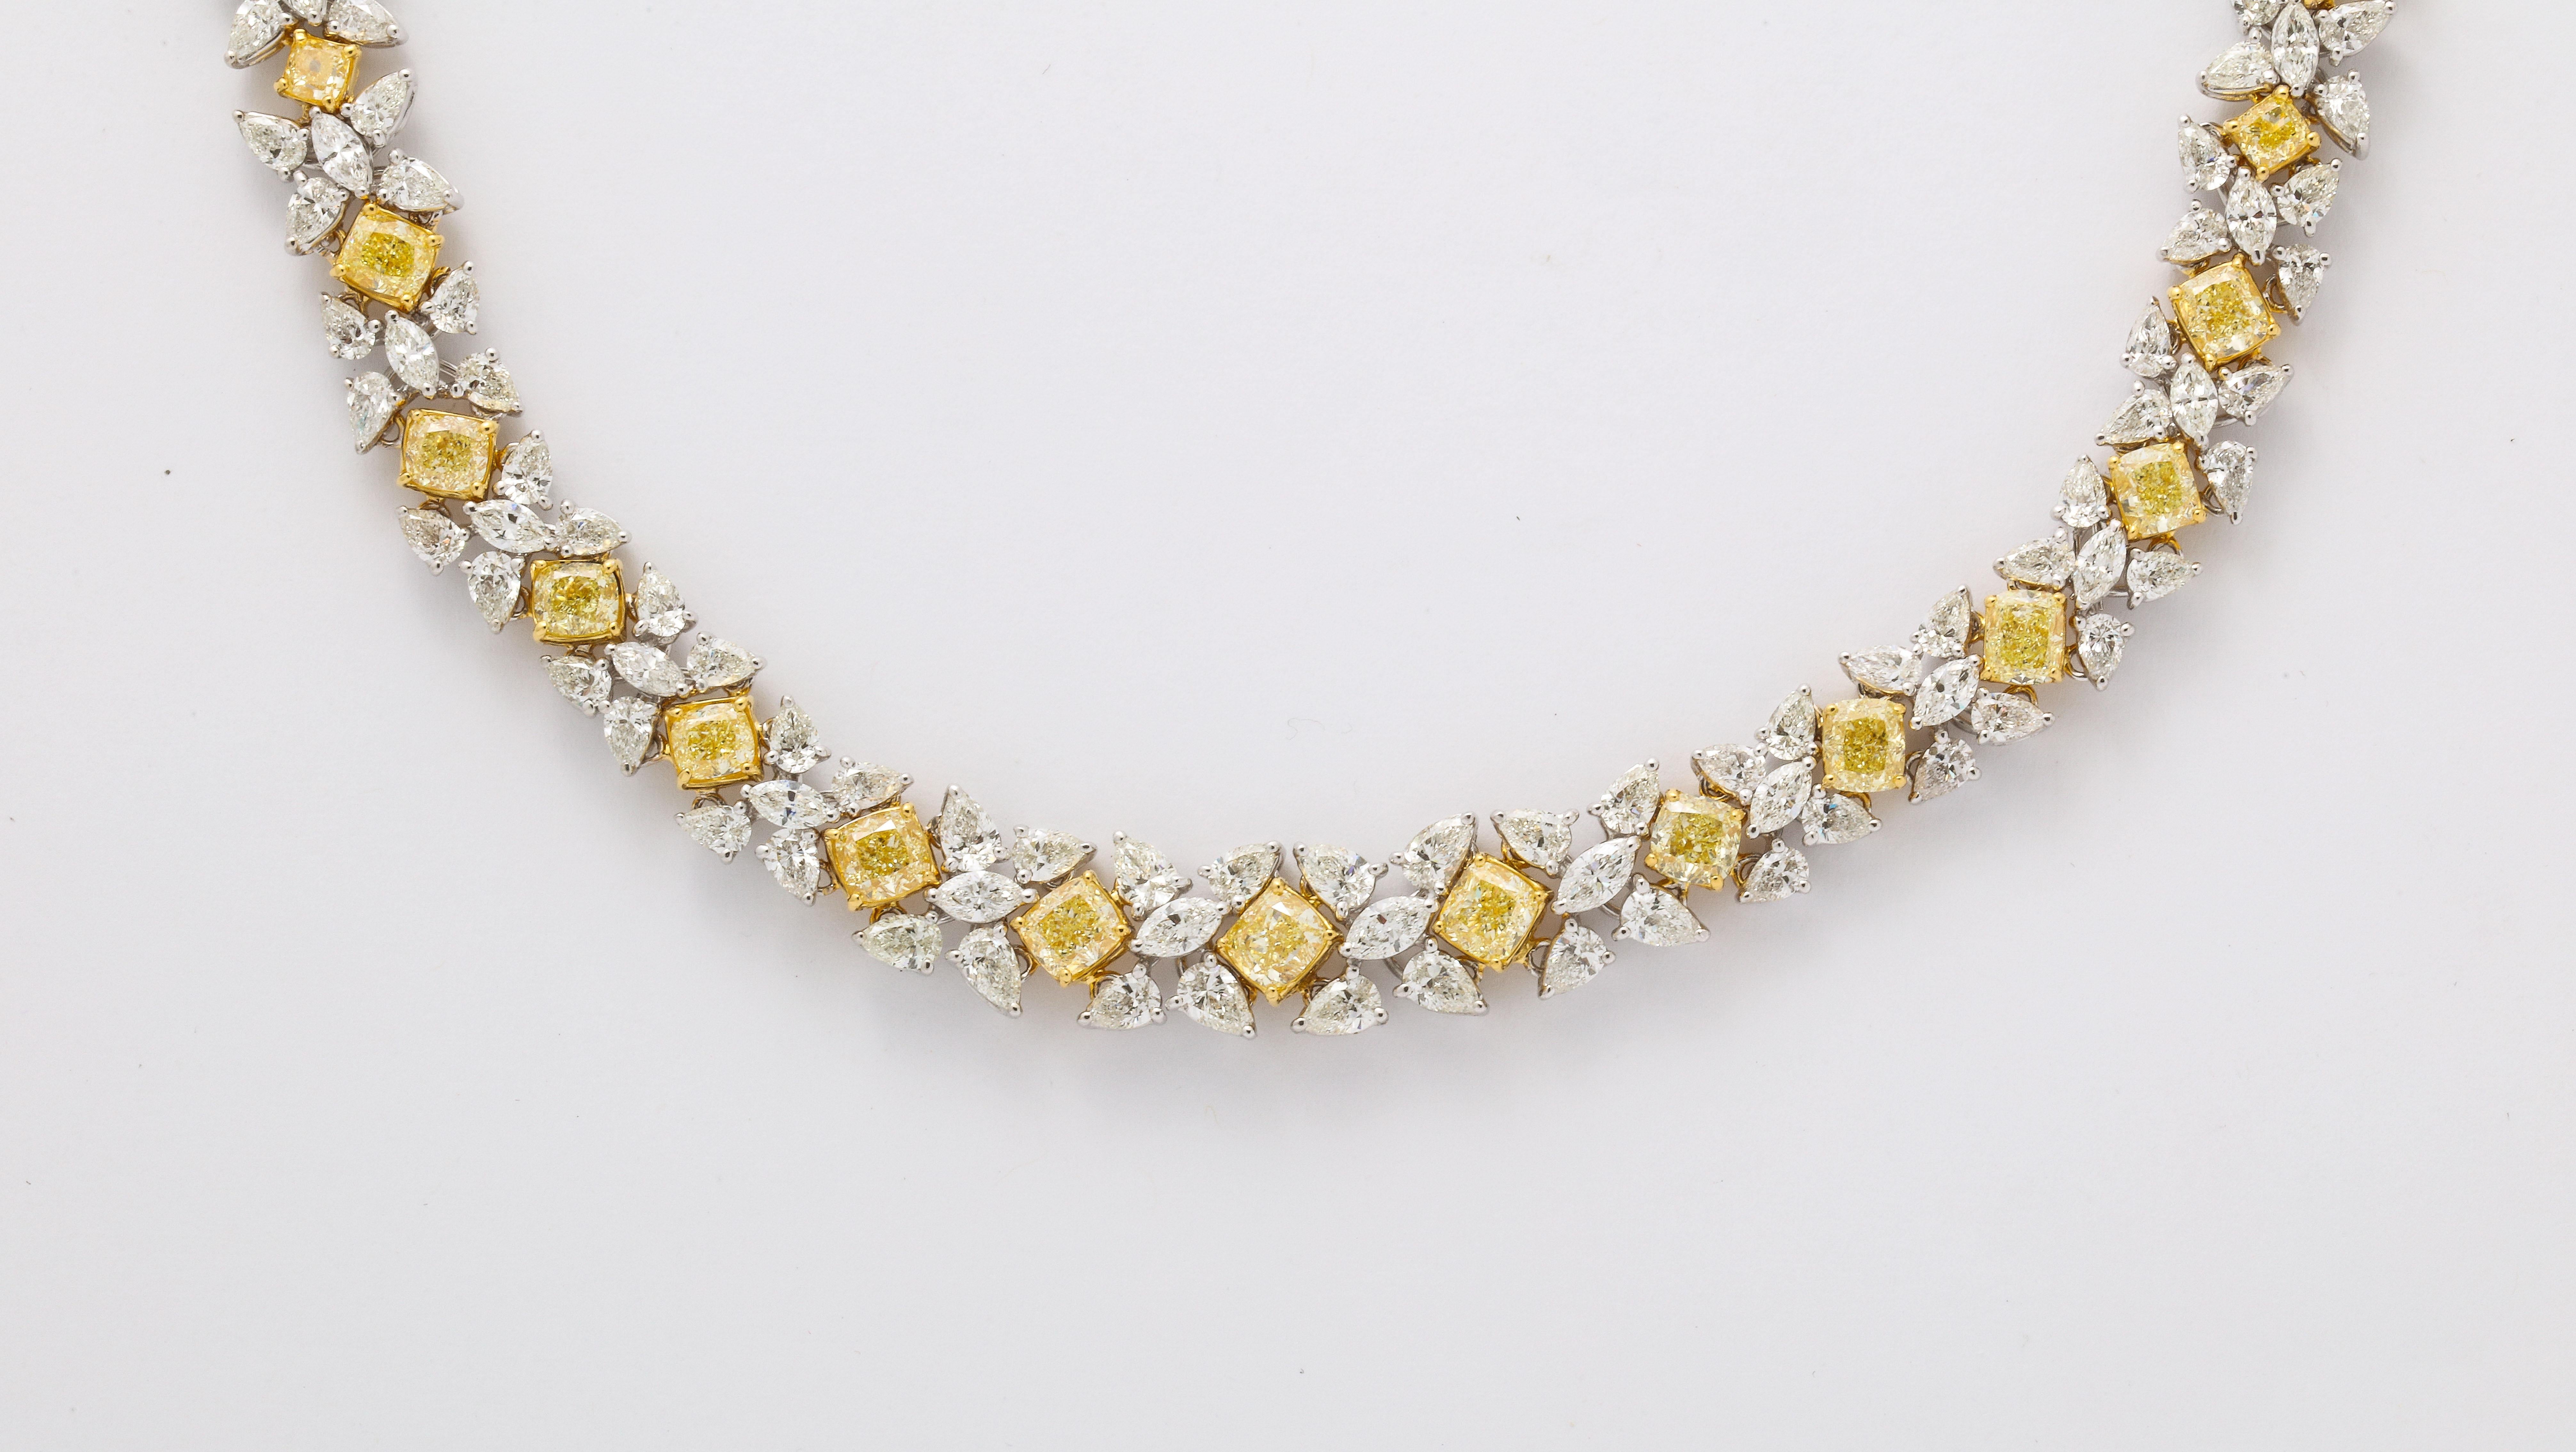 
An exquisitely designed piece! 

43.87 of Fancy Yellow and white diamonds set in 18k yellow and white gold. 

Fancy Yellow cushion cut diamonds are set between white pear and marquise cut diamonds. 

Featuring 2 locks with an extension - the